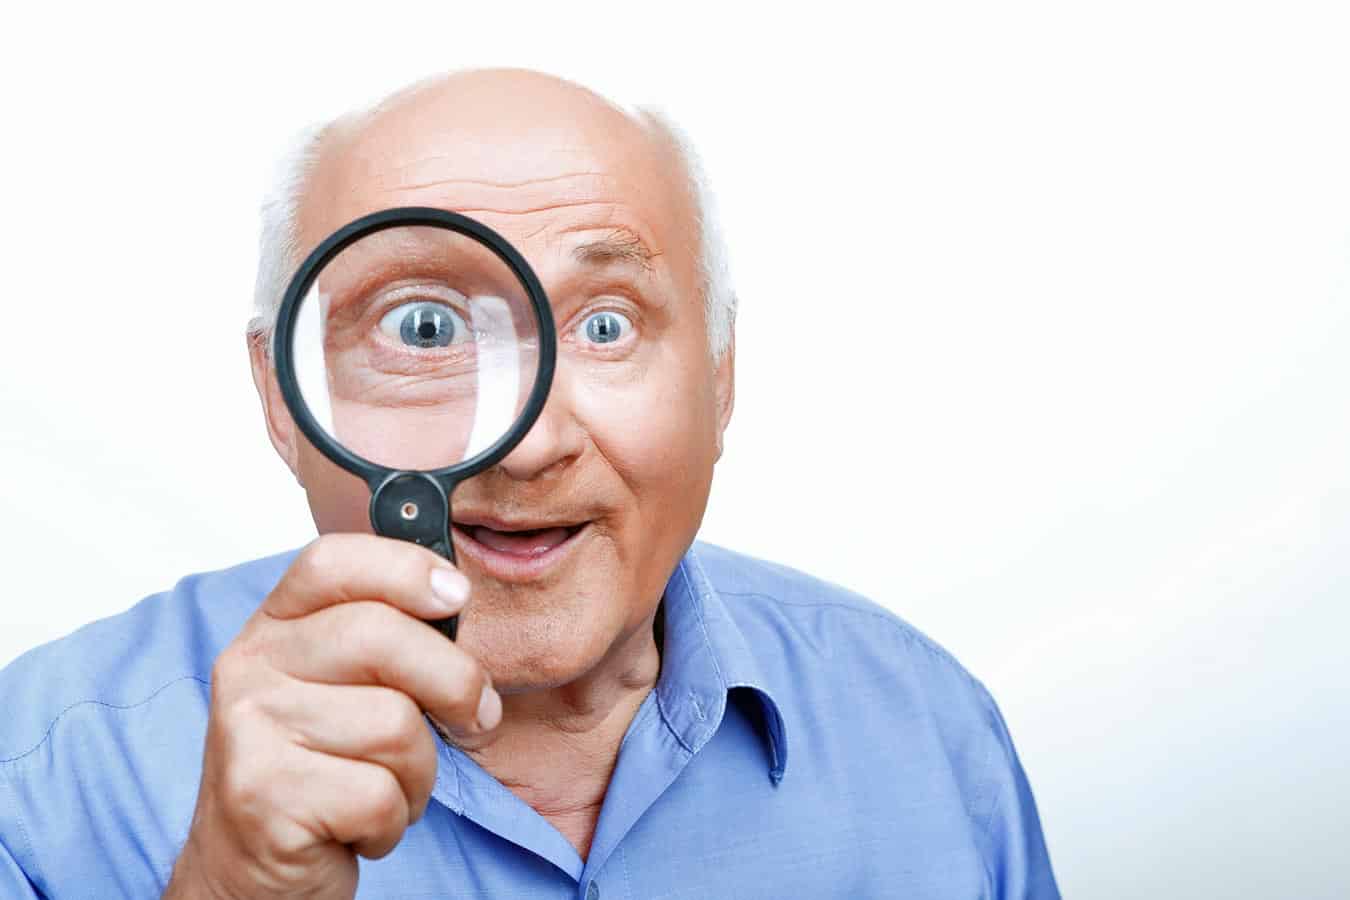 research-all-options-before-legally-getting-rid-of-timeshare-contracts-magnifying-glass-grandpa-funny-cancellation-humor